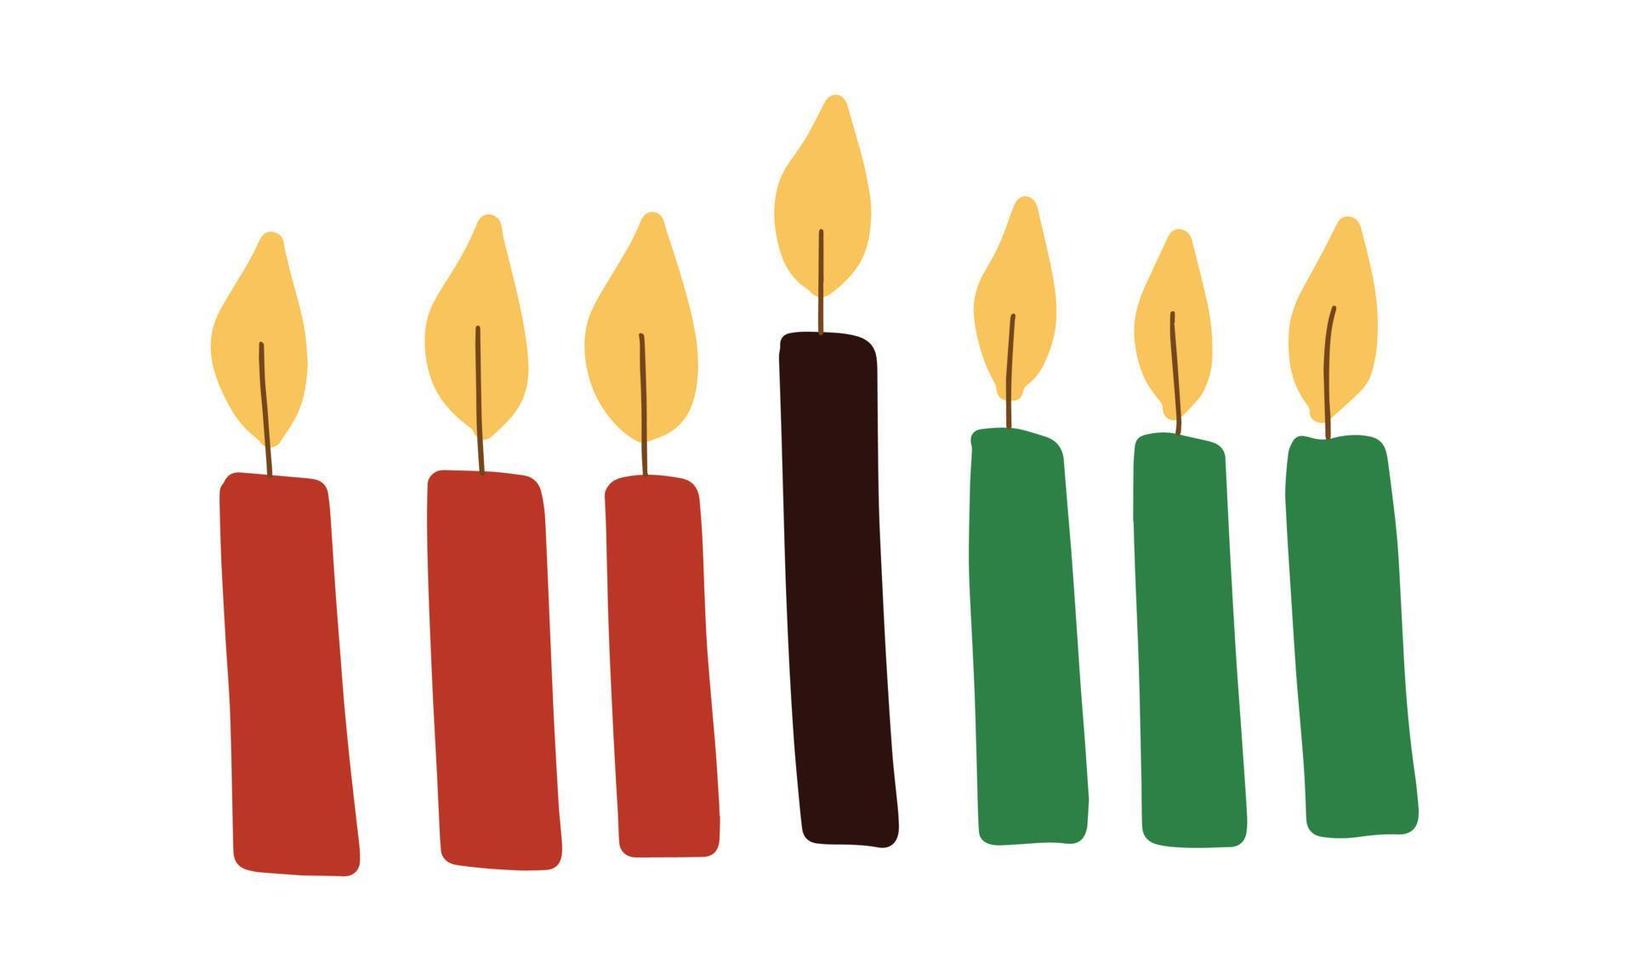 Seven Kwanzaa kinara candles in traditional African colors - red, black, green. Simple vector illustration, drawing candles clip art for Kwanzaa festival